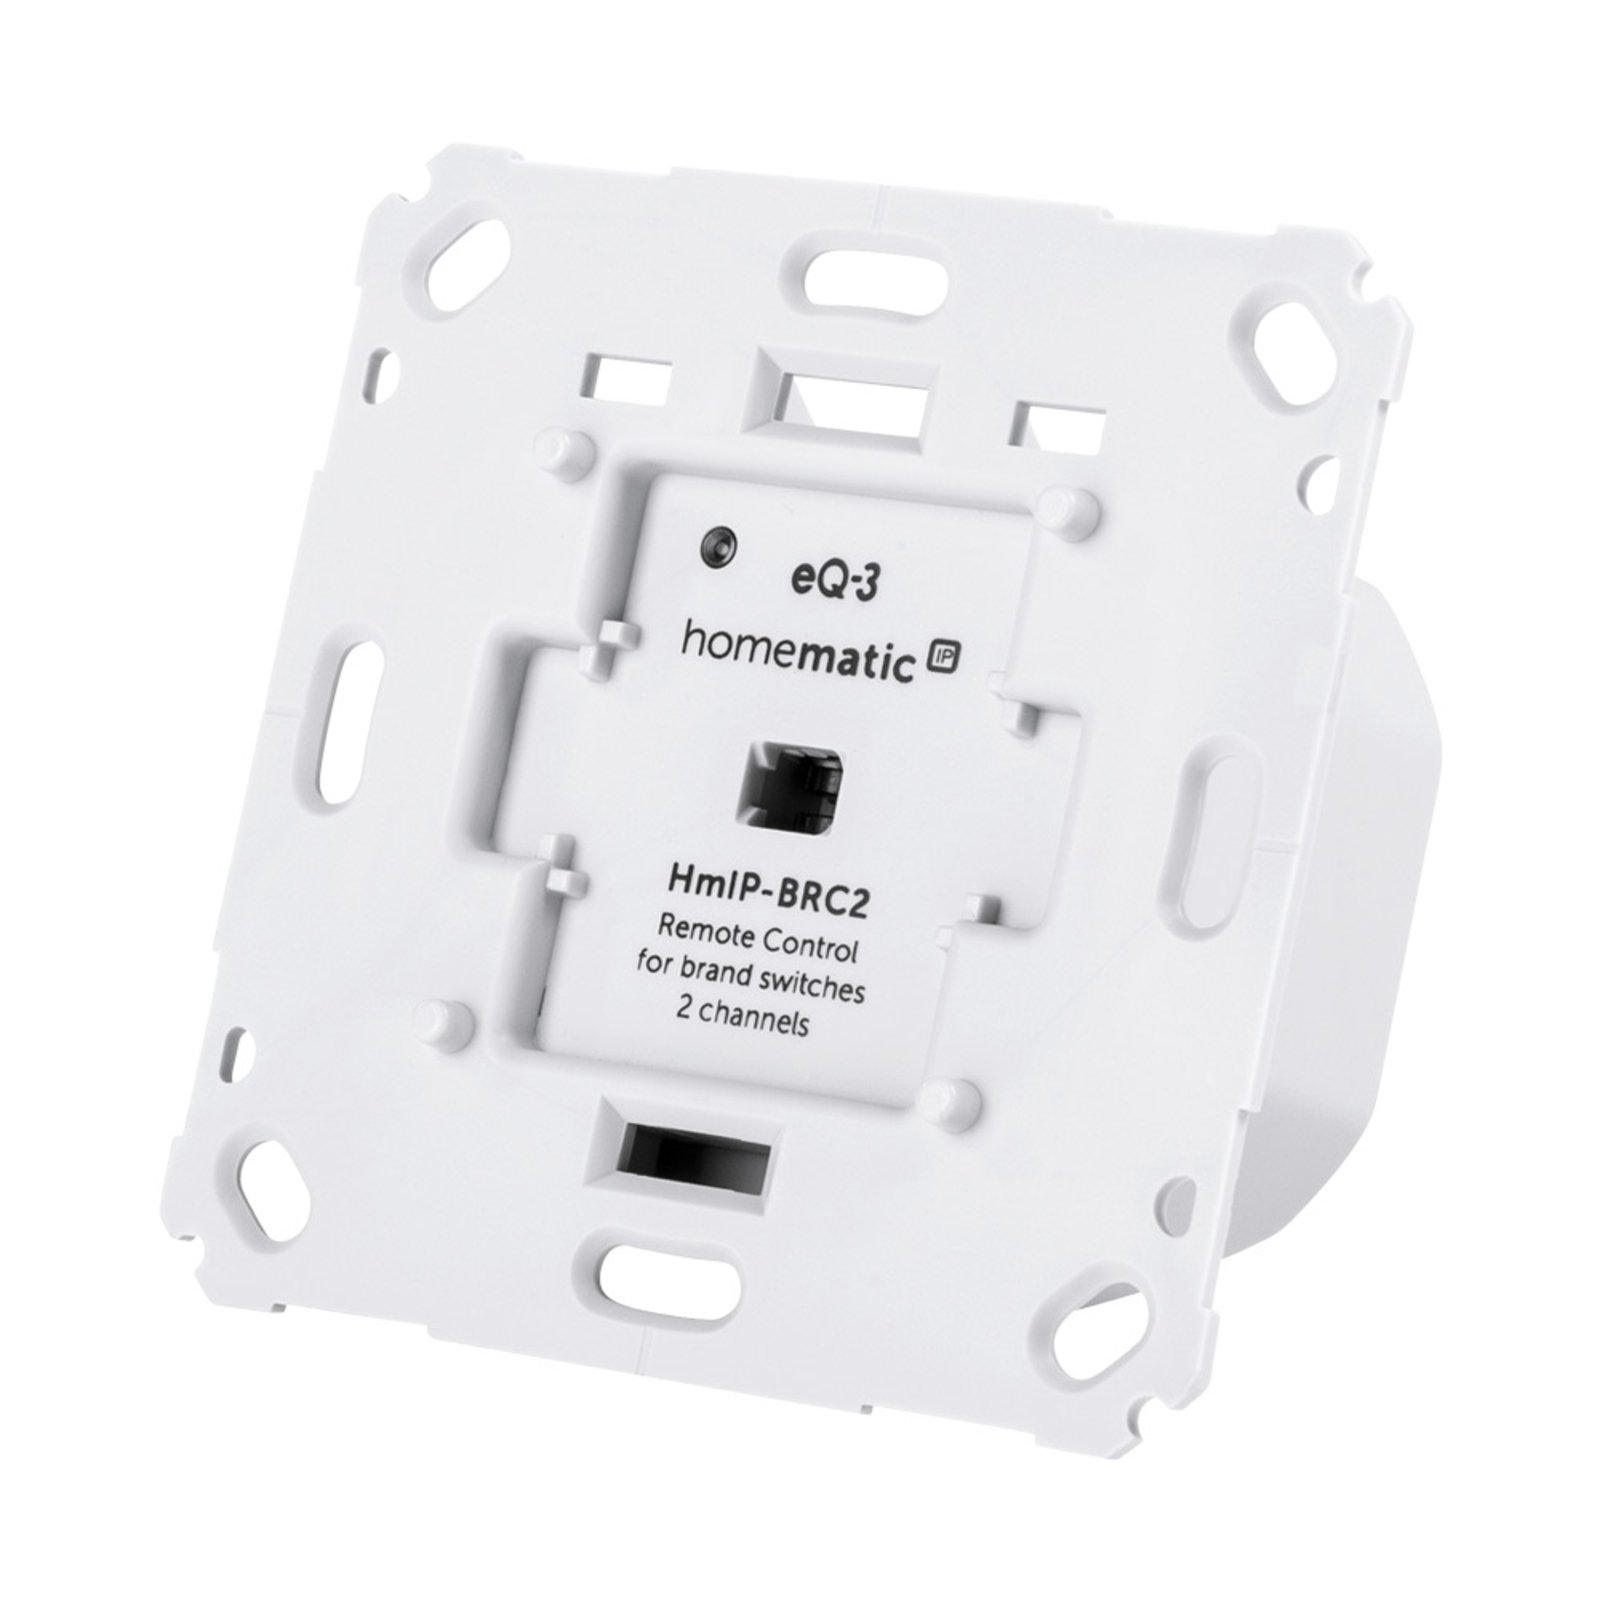 Homematic IP wall control unit for brand switches